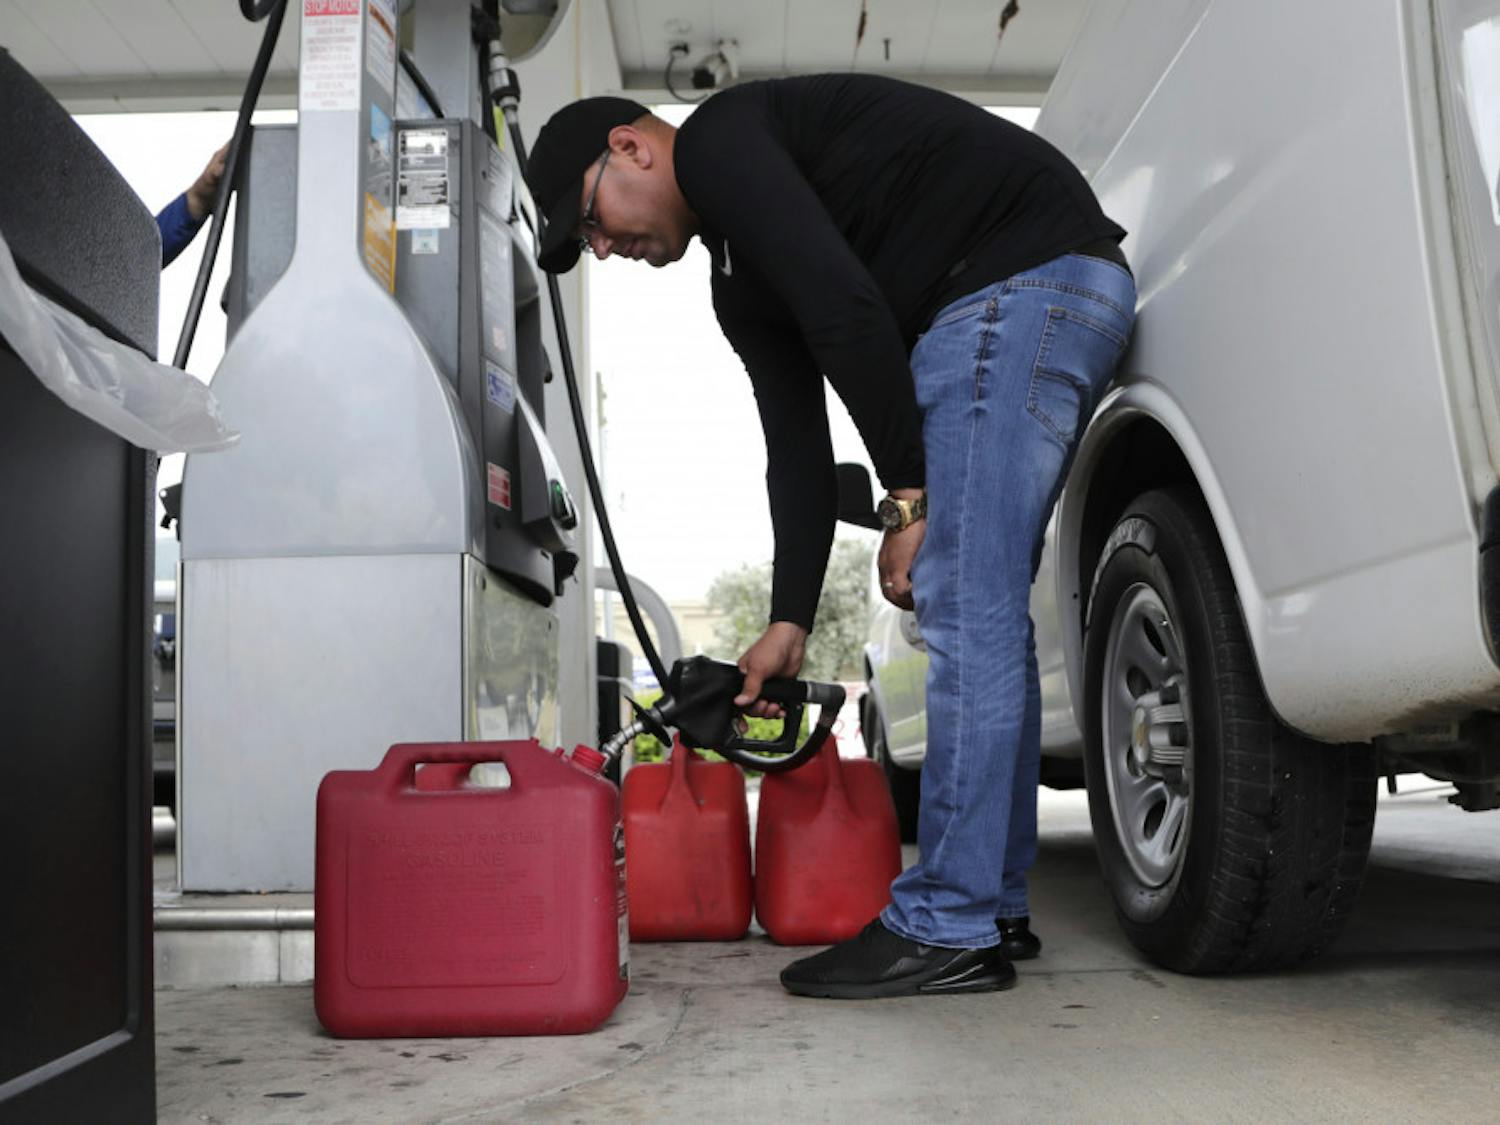 Arian Britto fills containers with gasoline at BJ's Wholesale Club in preparation for Hurricane Dorian, Thursday, Aug. 29, 2019, in Hialeah, Fla. Hurricane Dorian is heading towards Florida for a possible direct hit on the state over Labor Day. (AP Photo/Lynne Sladky)